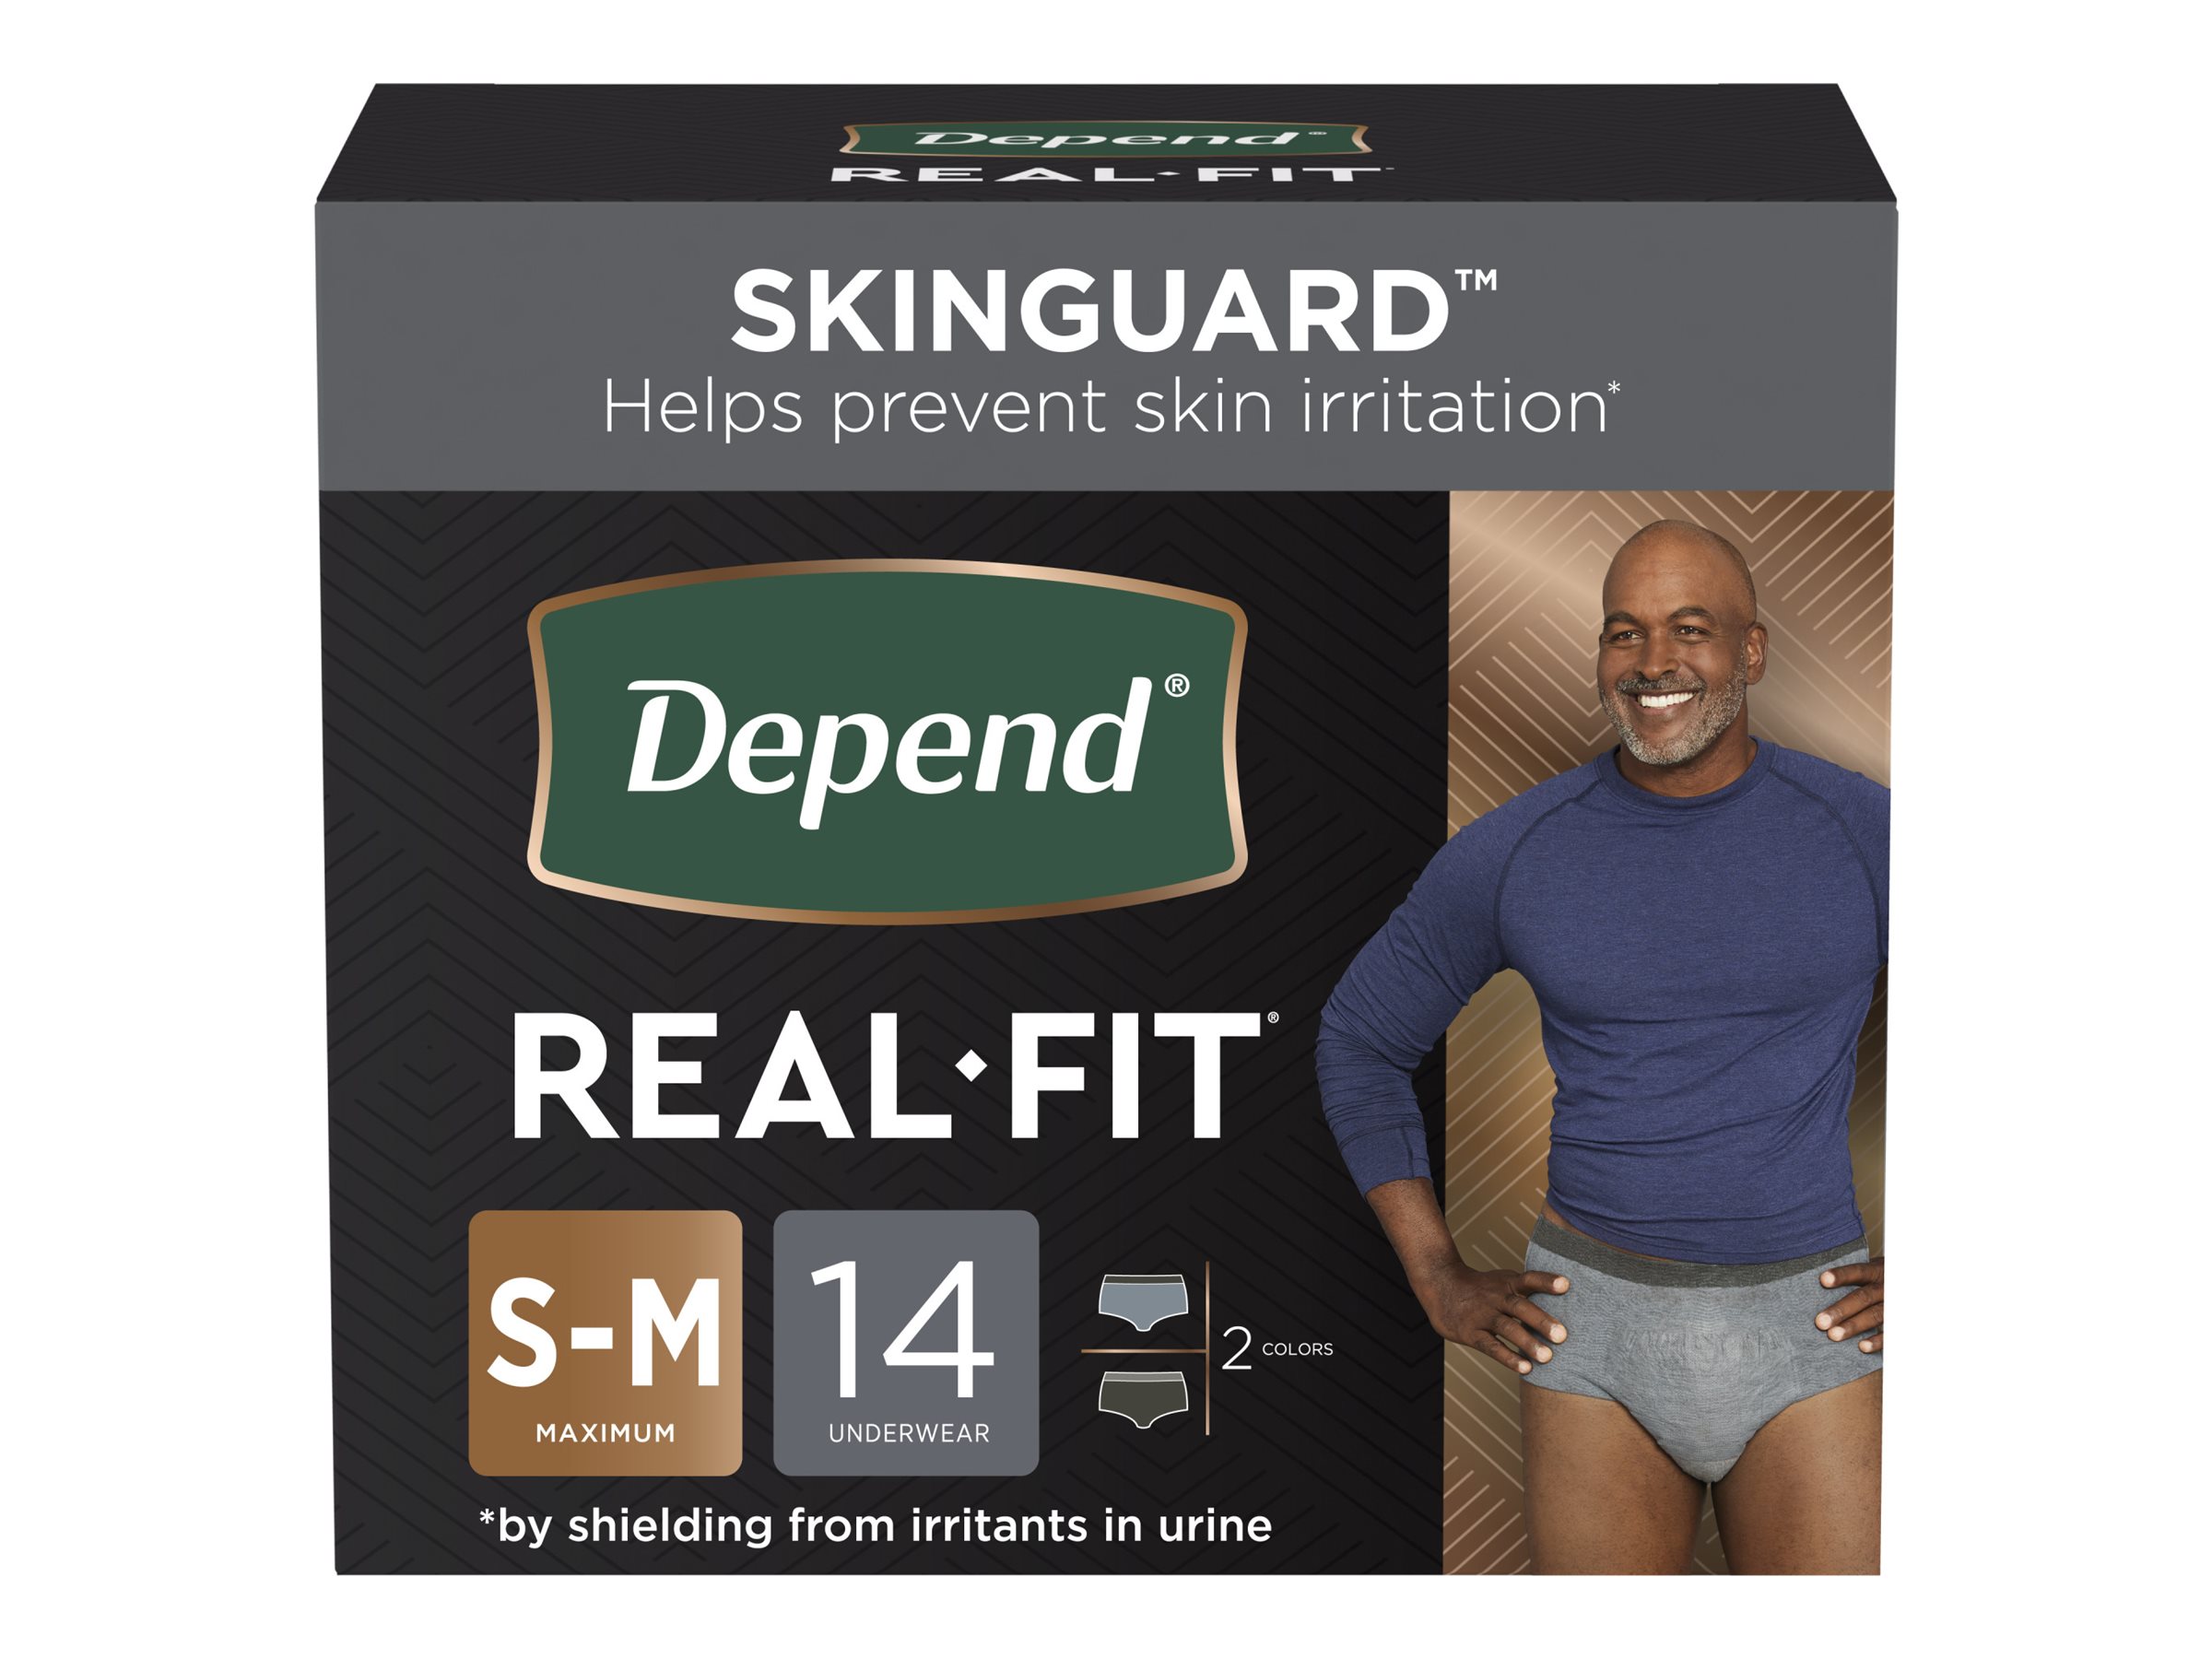  Depend Fit-Flex Underwear for Women Small Maximum Absorbency -  2 Packs of 19 ct : Health & Household